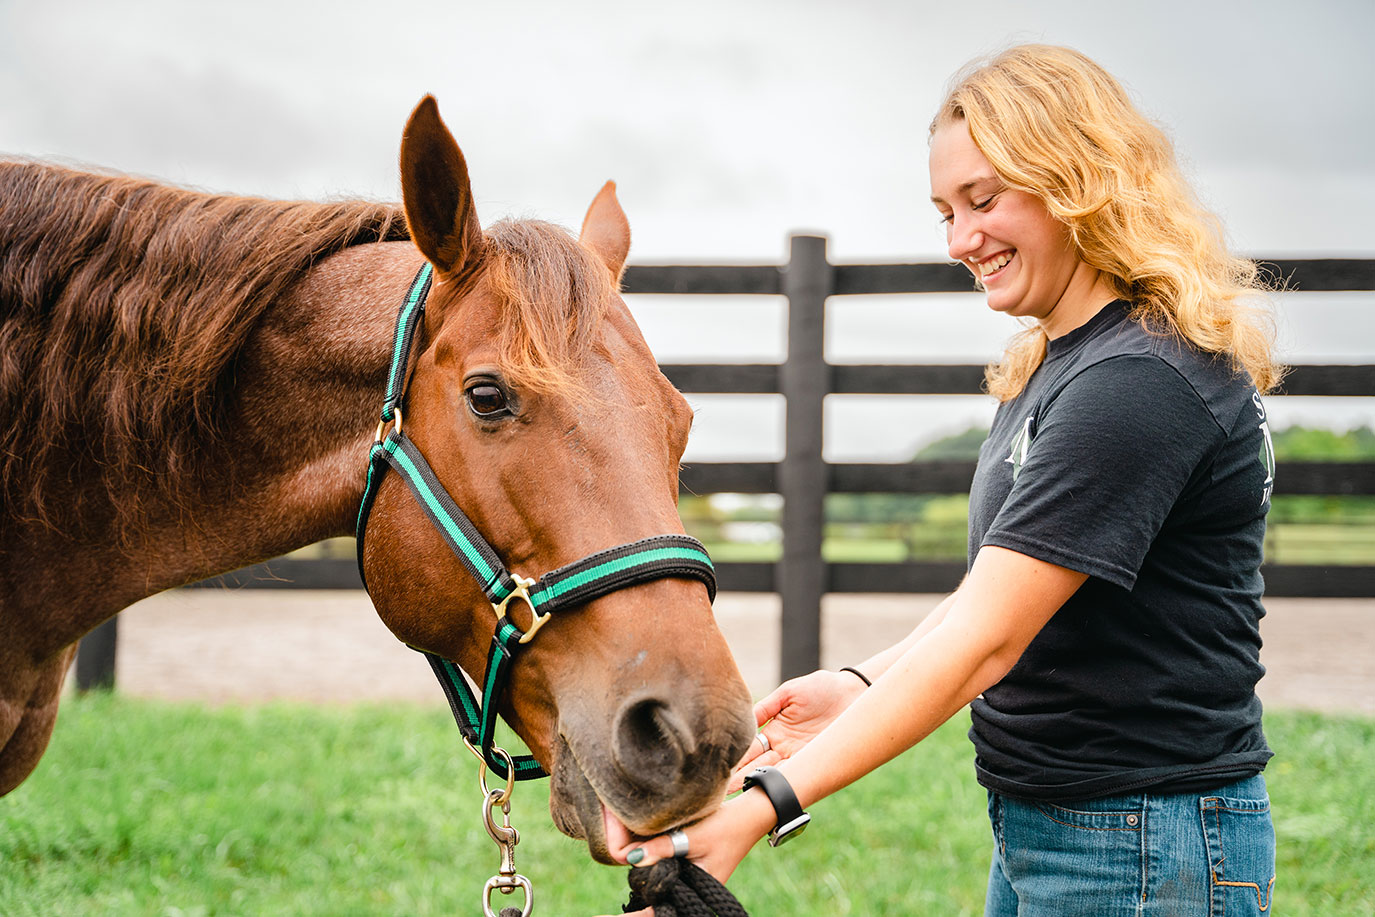 Finn and equine student Victoria Epstein share a bonding moment